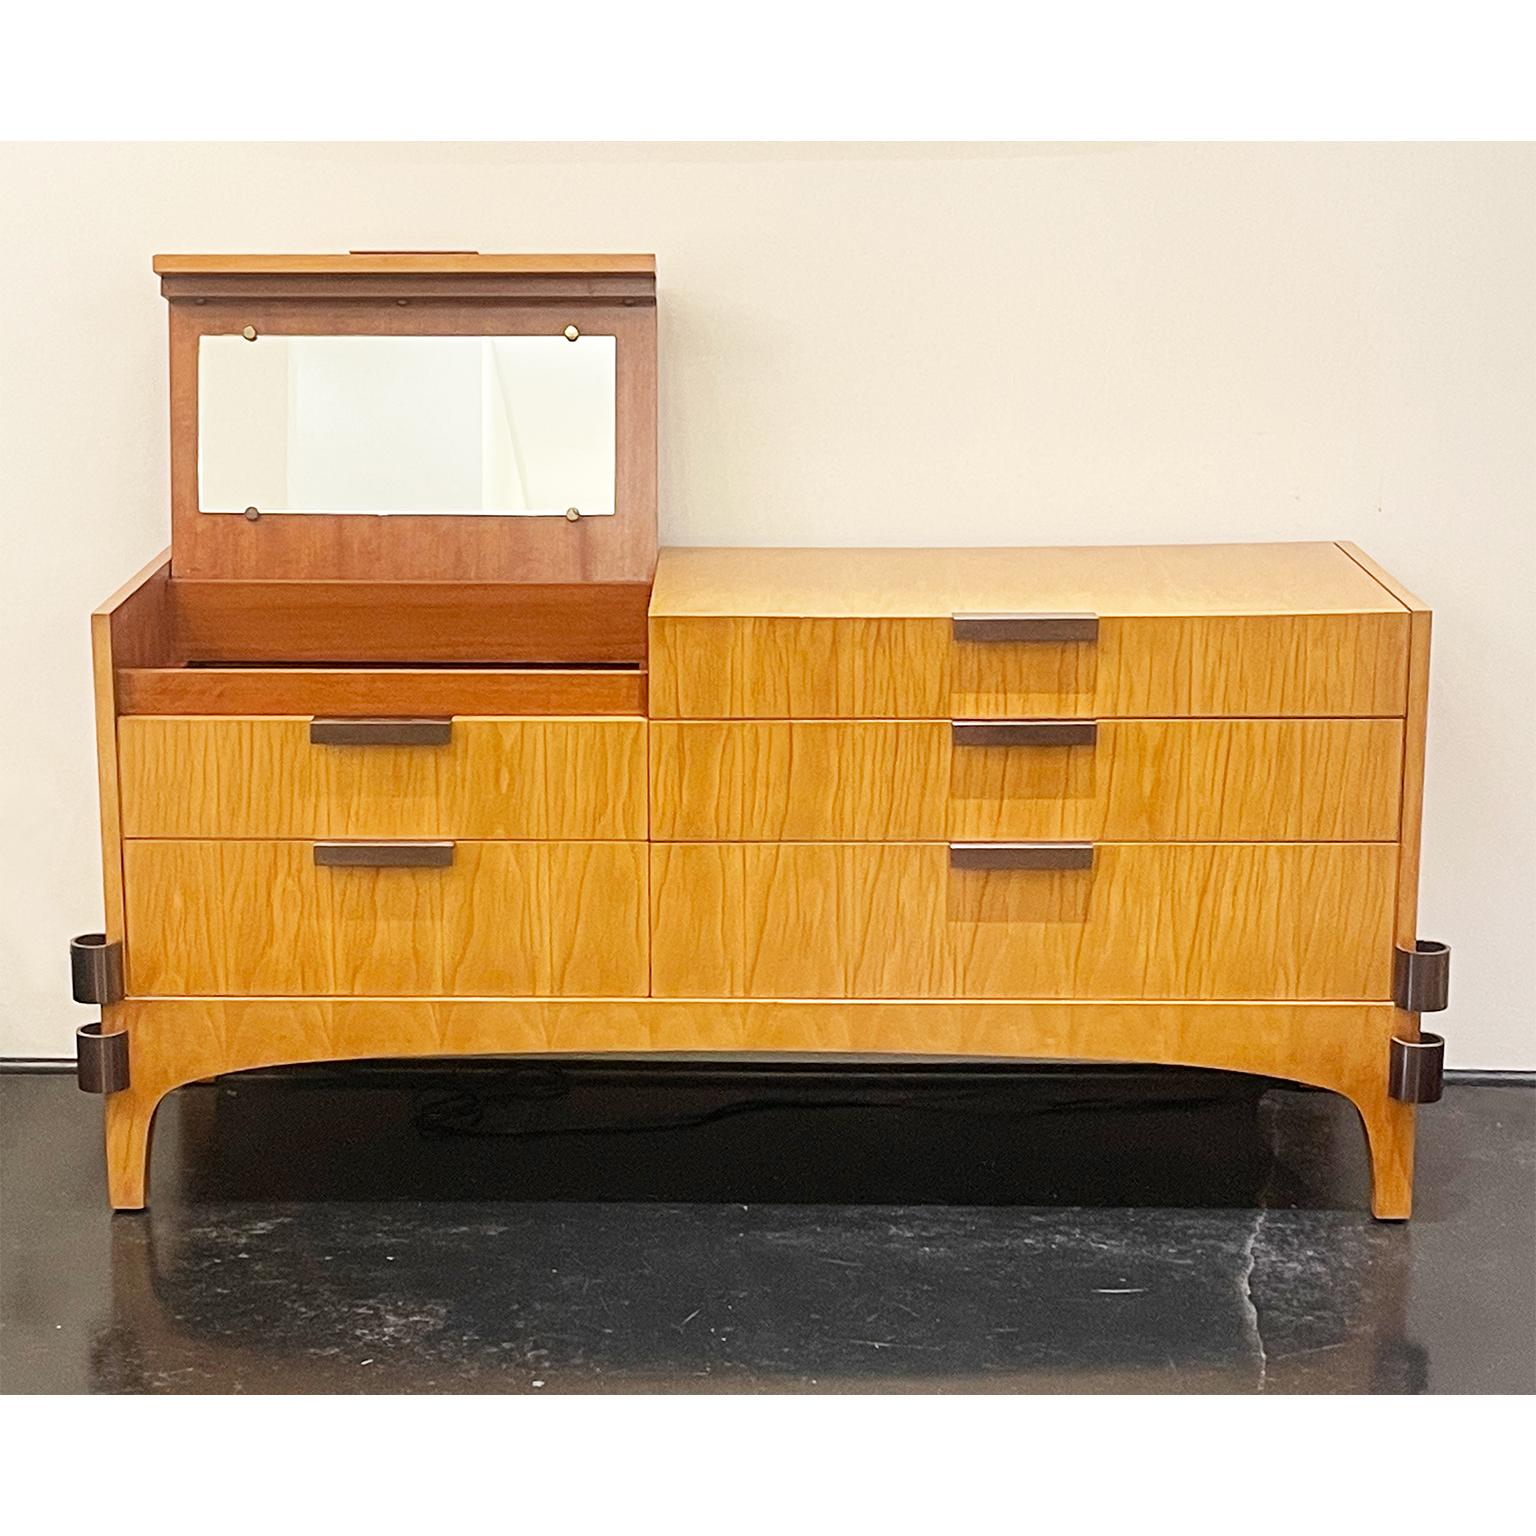 Mid-Century Modern Italian Mid-Century Vintage Chest of Drawers - Fir Wood & Antique Brass Details For Sale